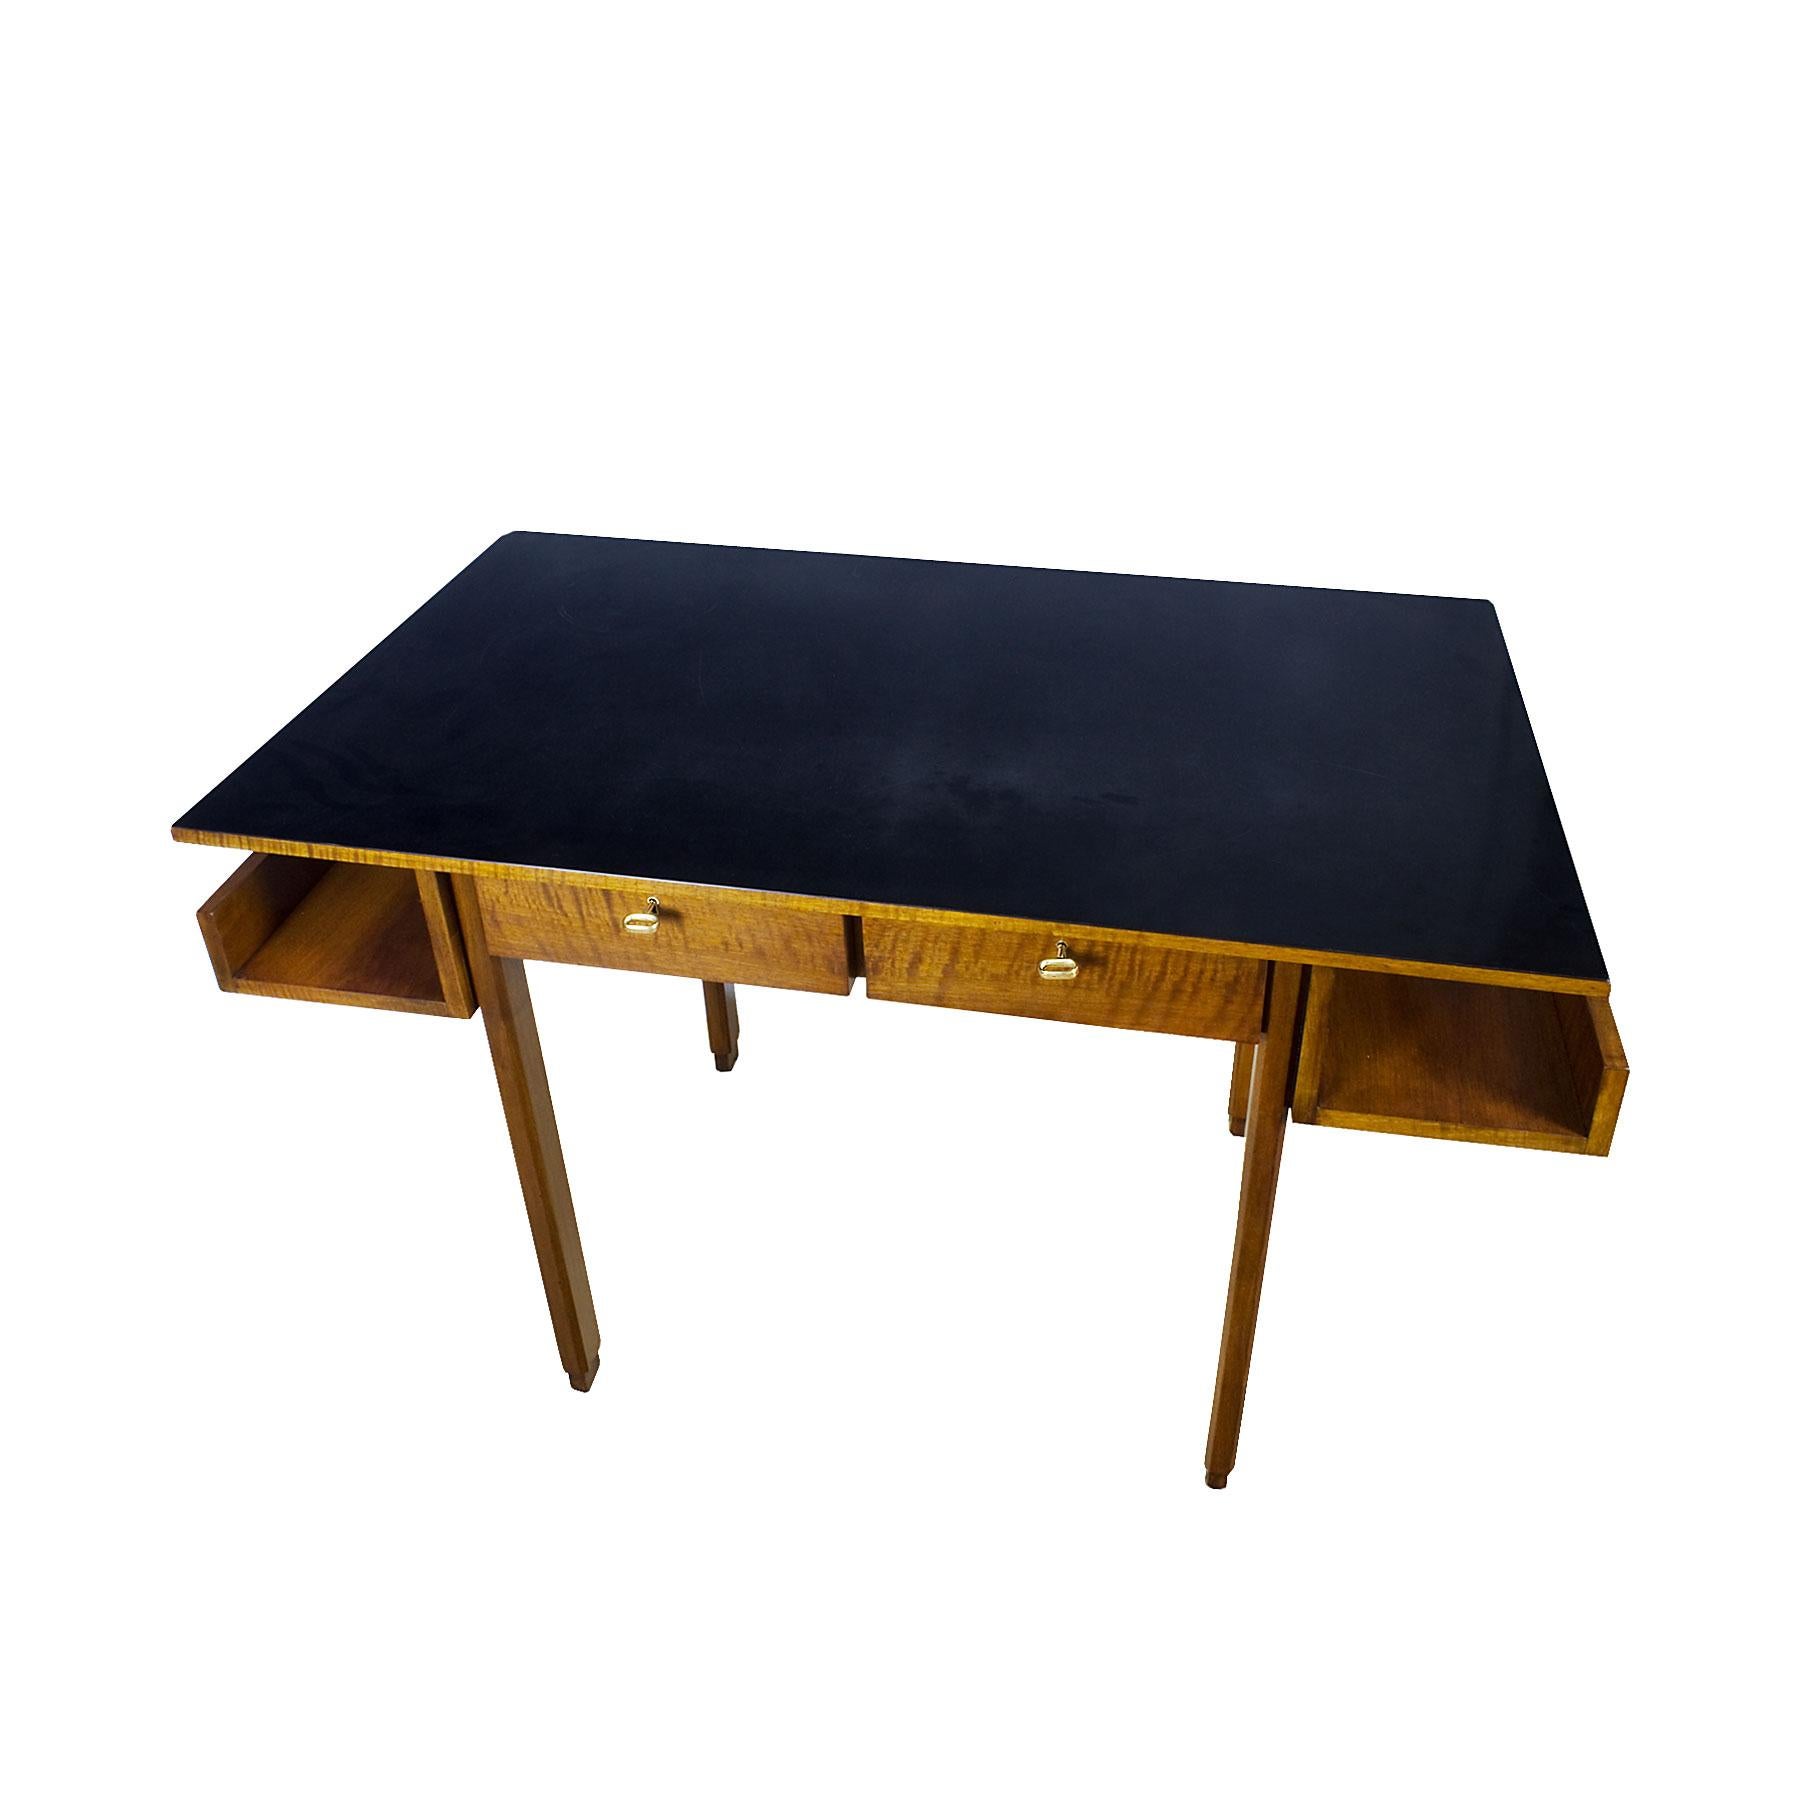 Late 20th Century 1970s Rationalist Desk by Pietro Bossi, Waxed Walnut, Brass, Formica, Italy